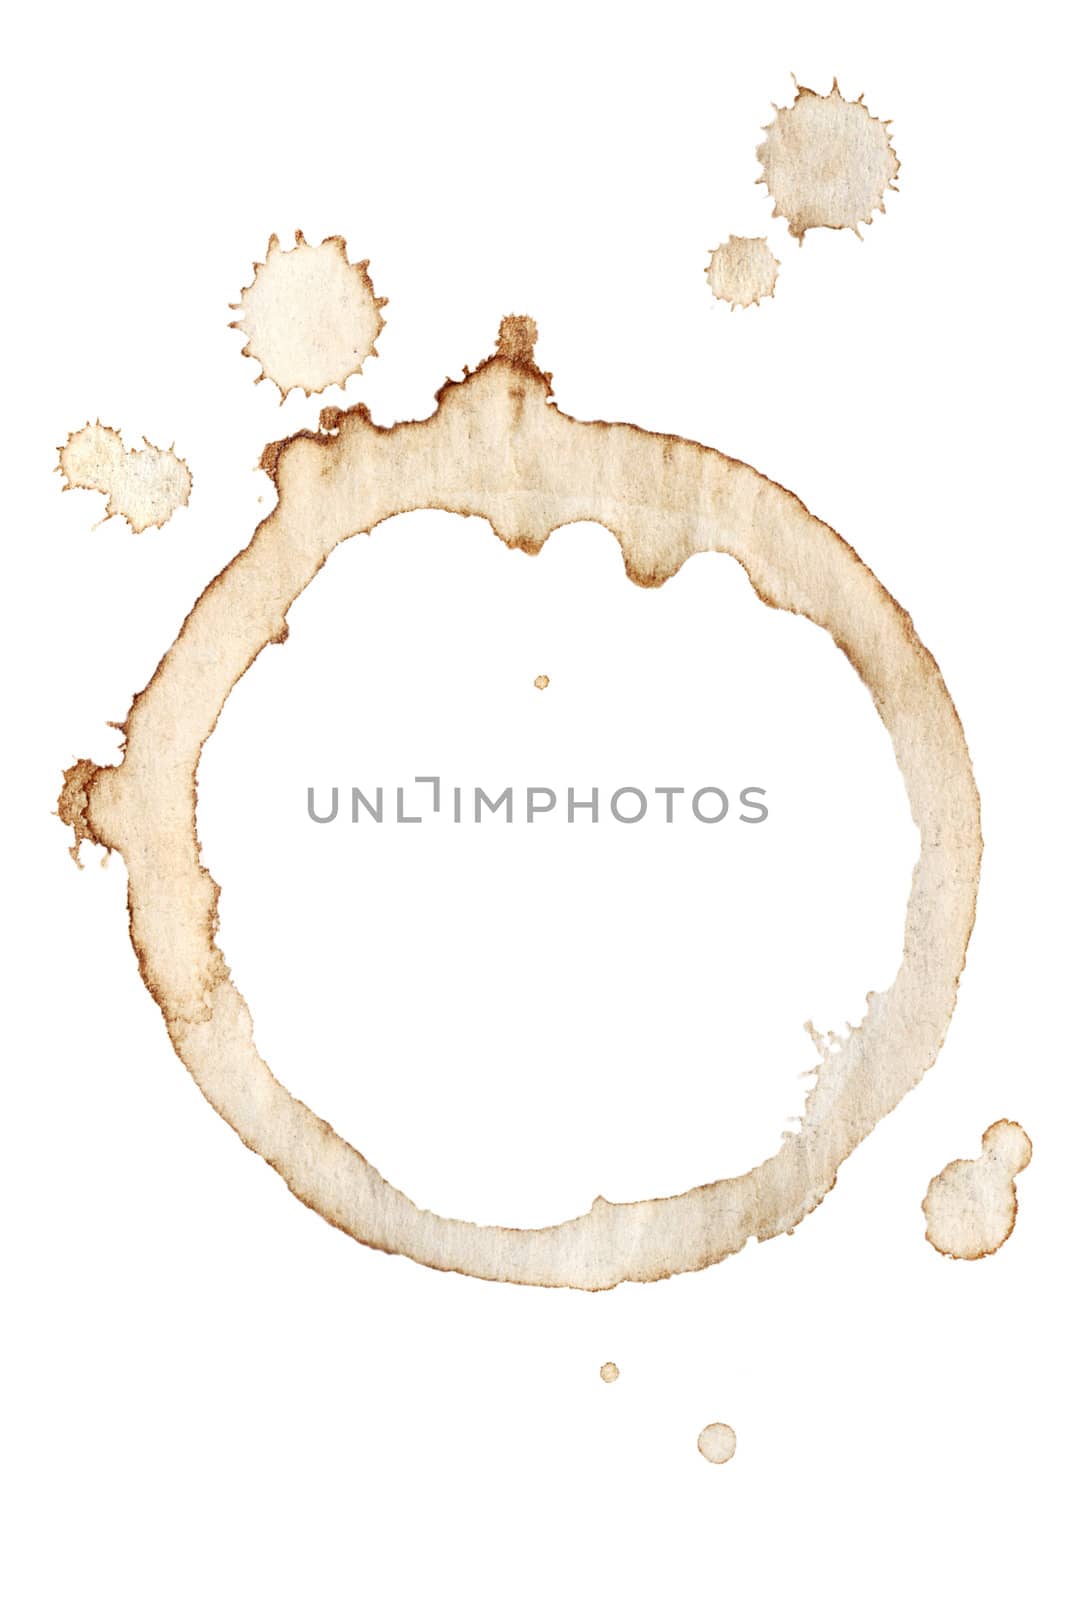 Coffee cup rings and splatters isolated on a white background.